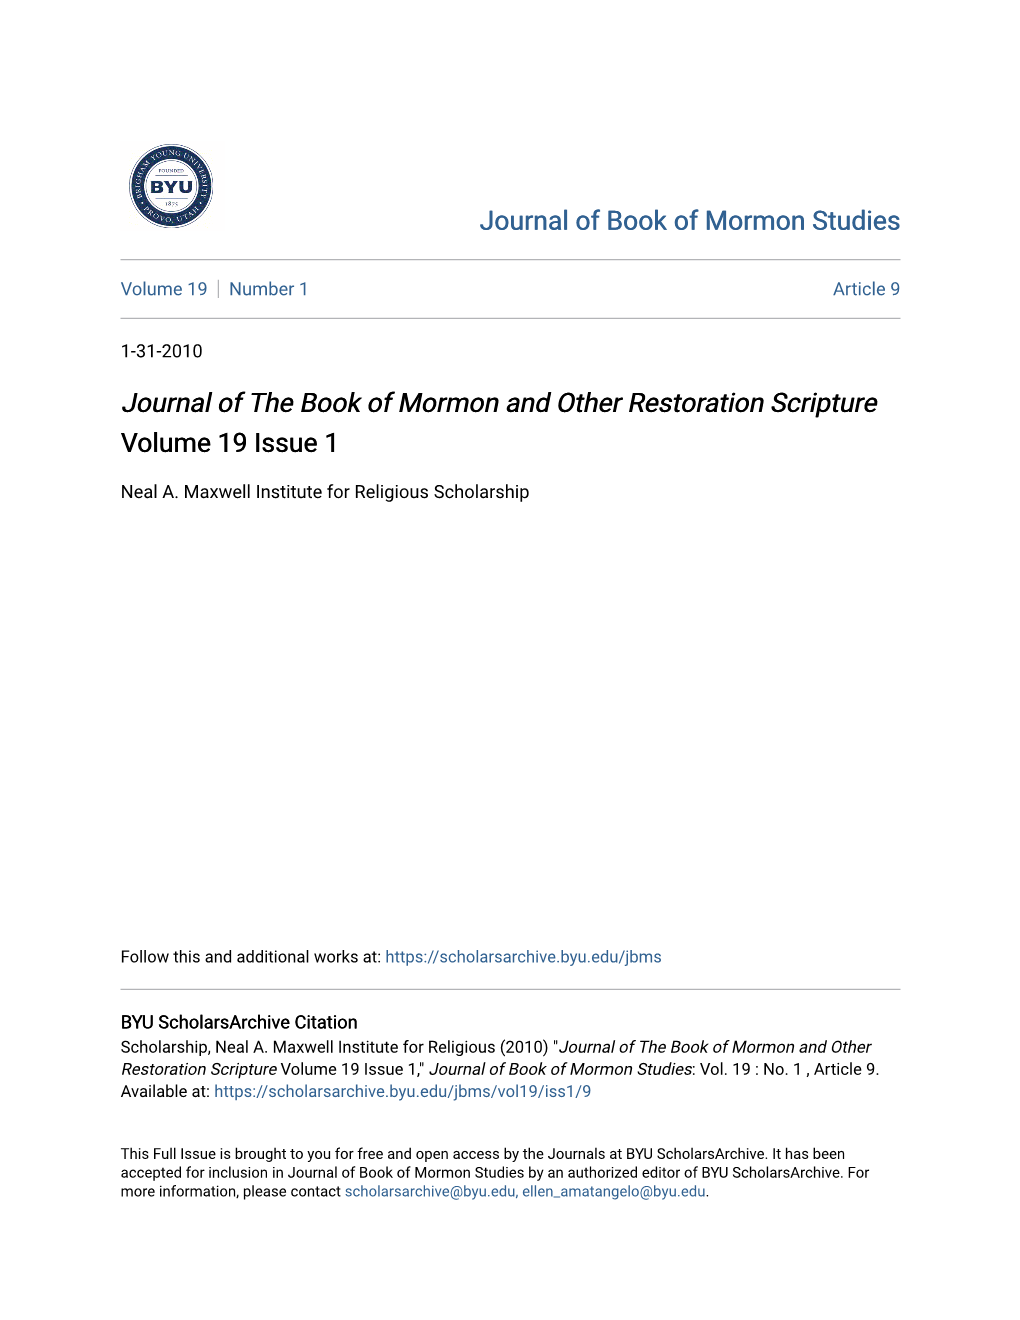 Journal of the Book of Mormon and Other Restoration Scripture Volume 19 Issue 1